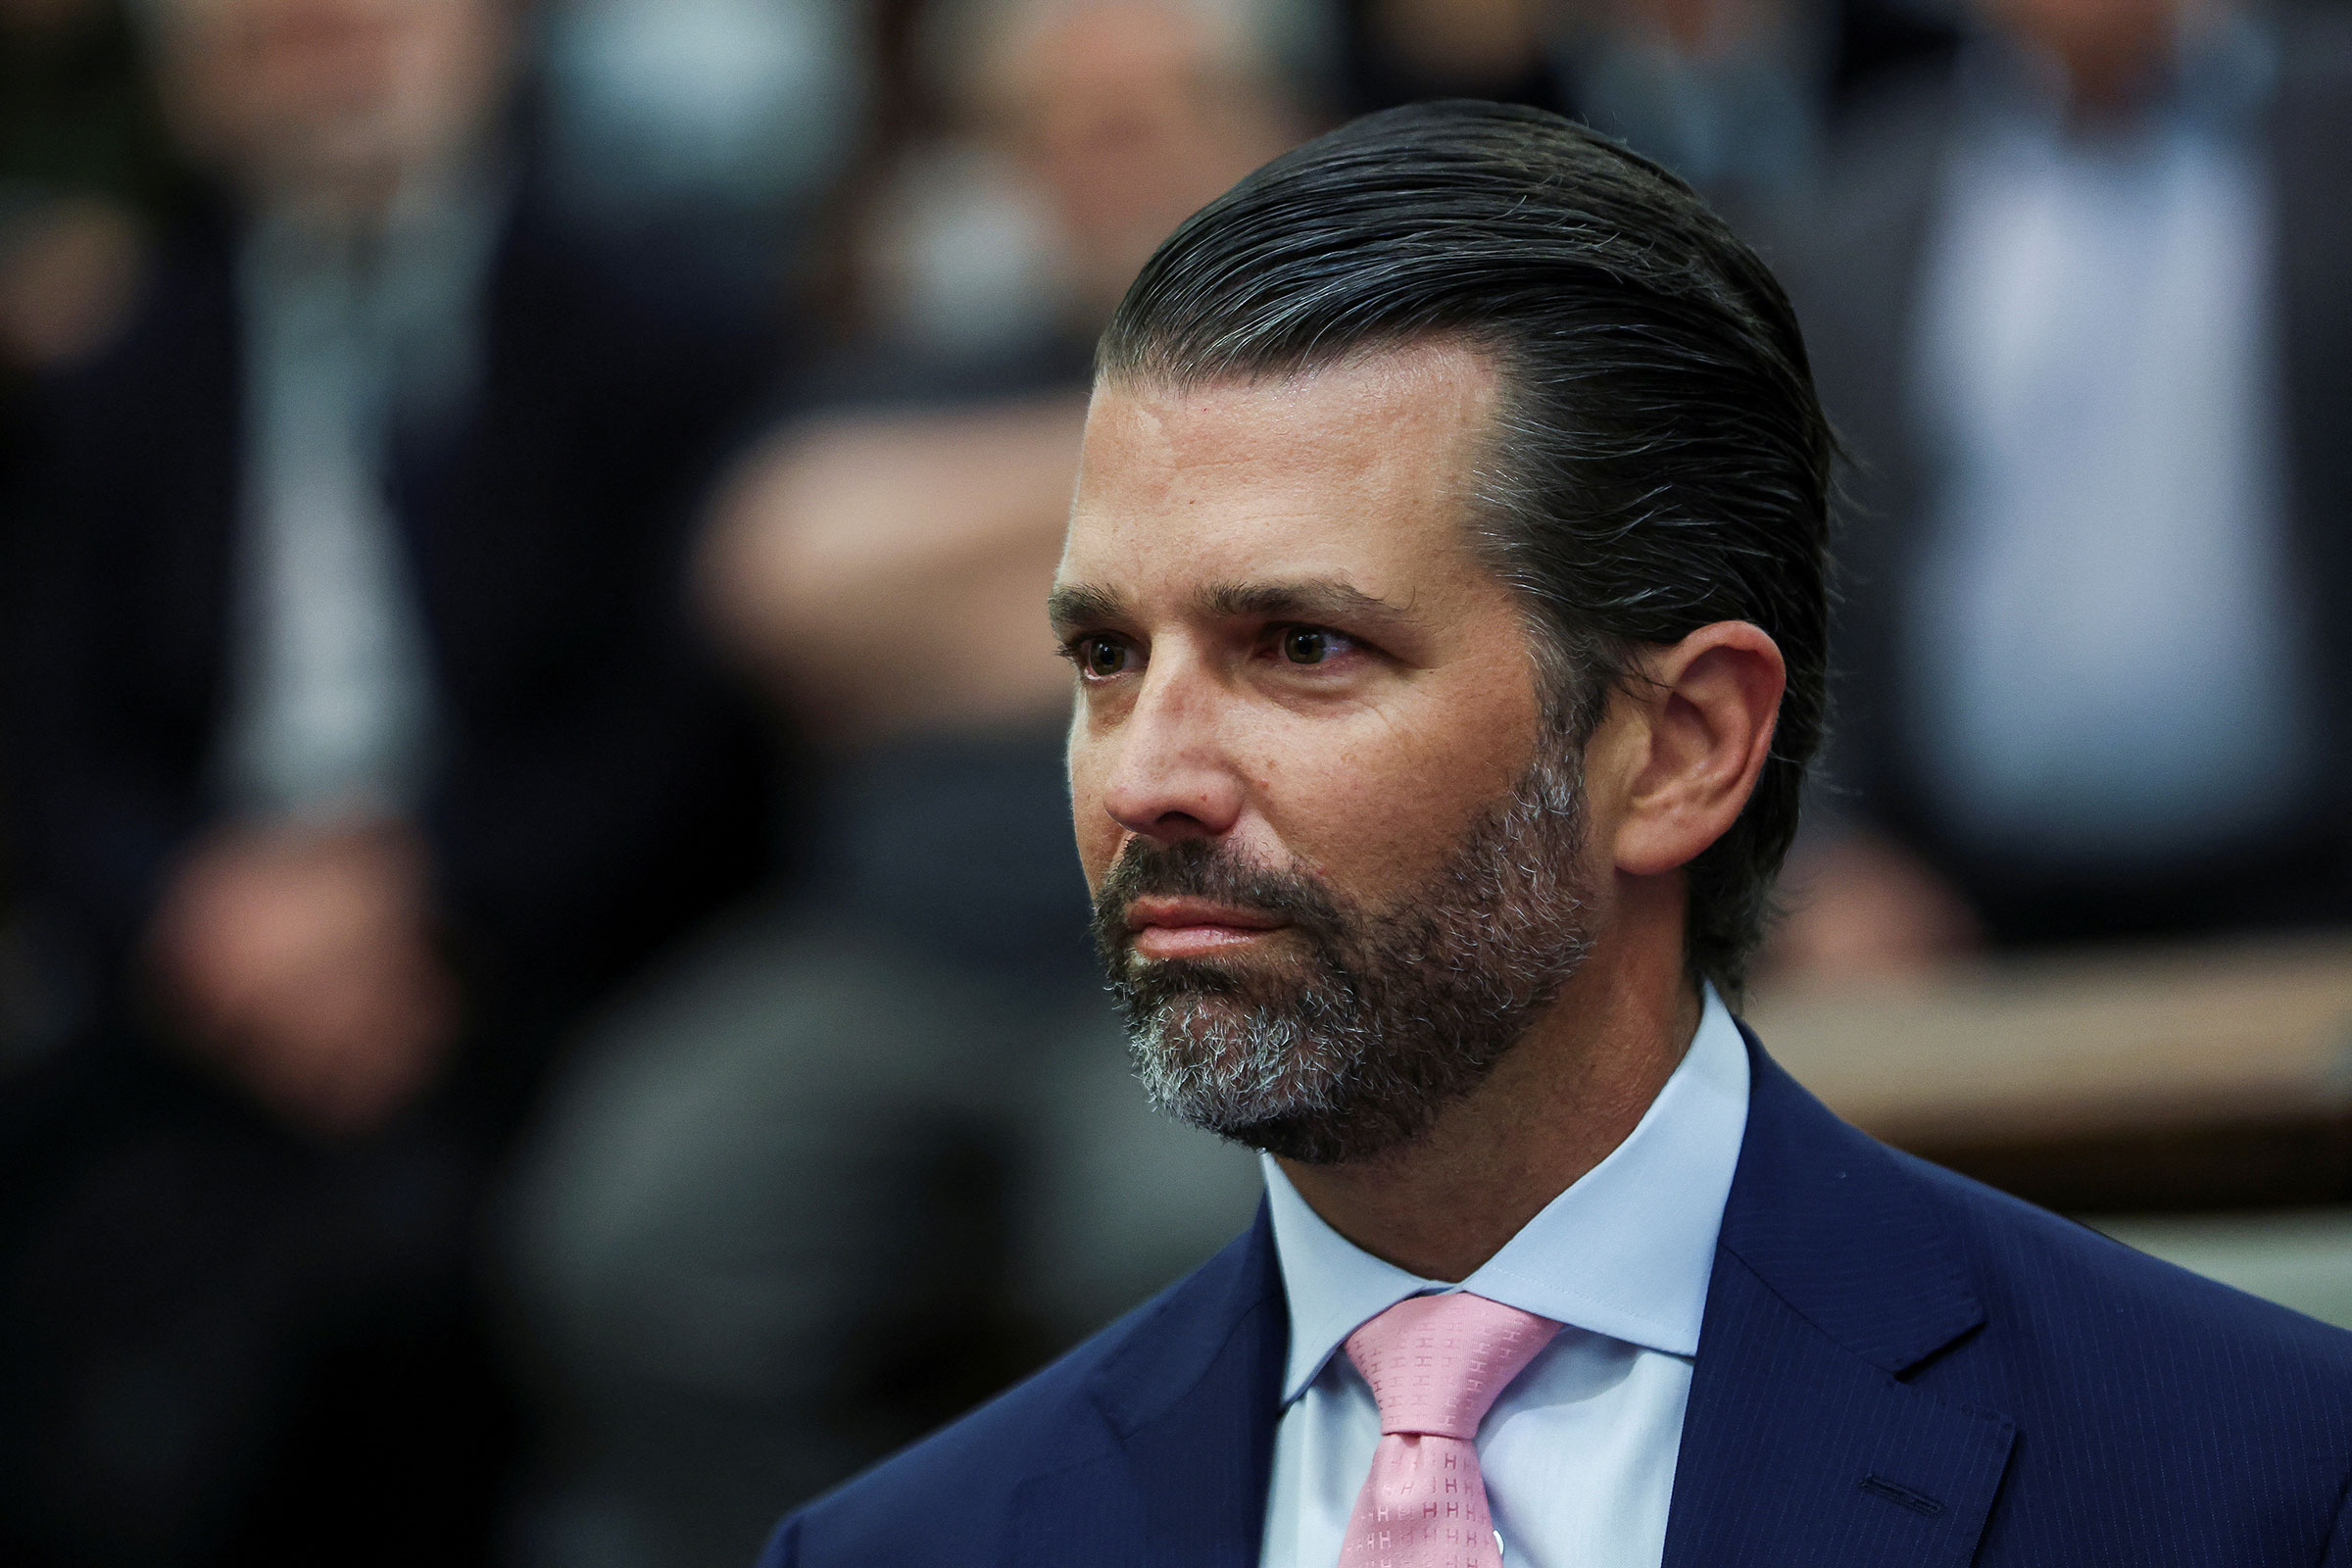 Donald Trump Jr. in court on Wednesday in New York.